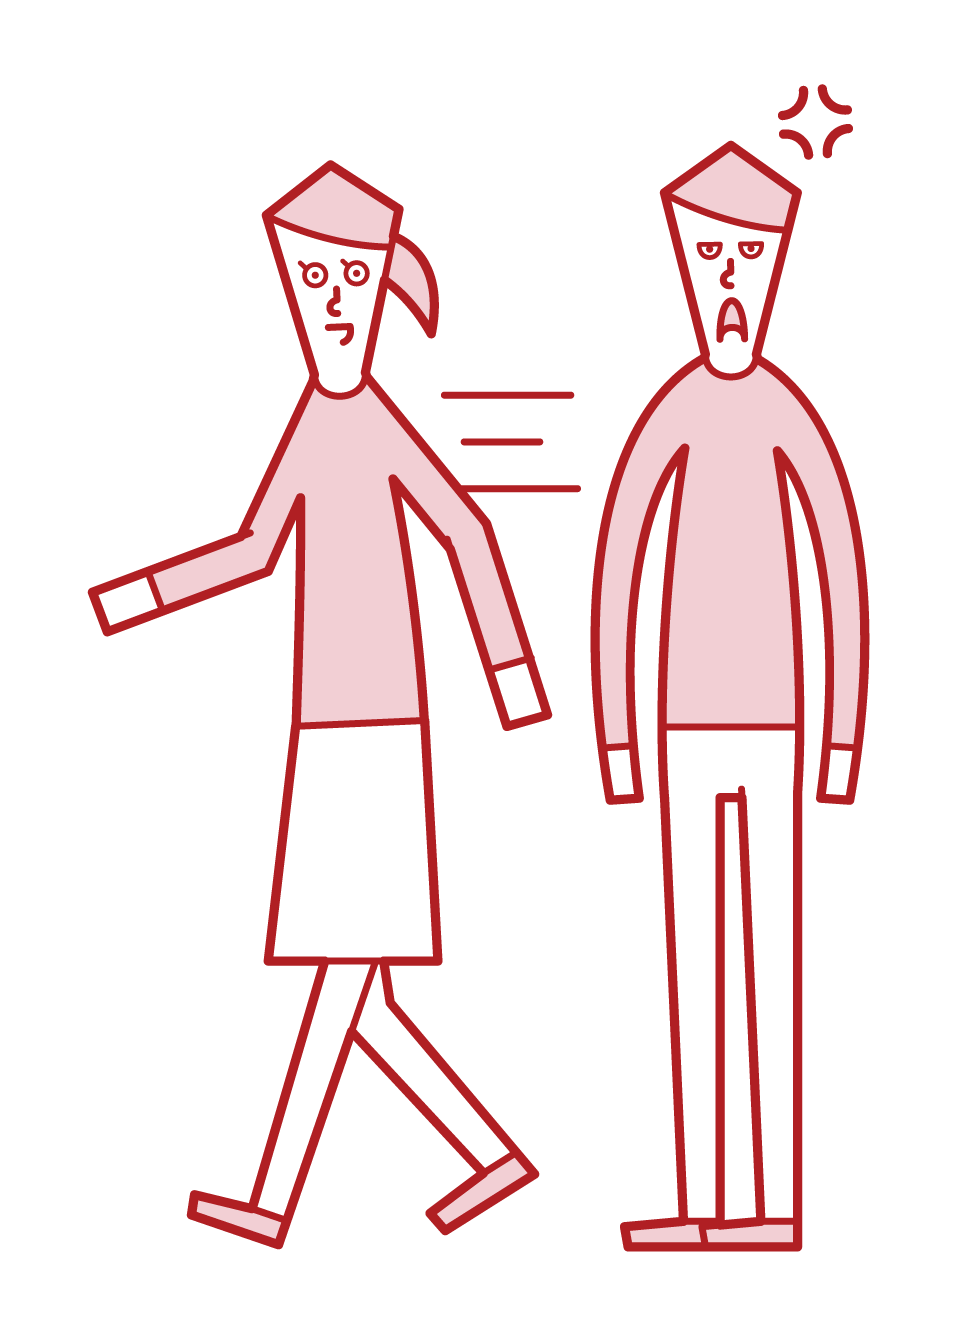 Illustration of a woman walking fast while dating